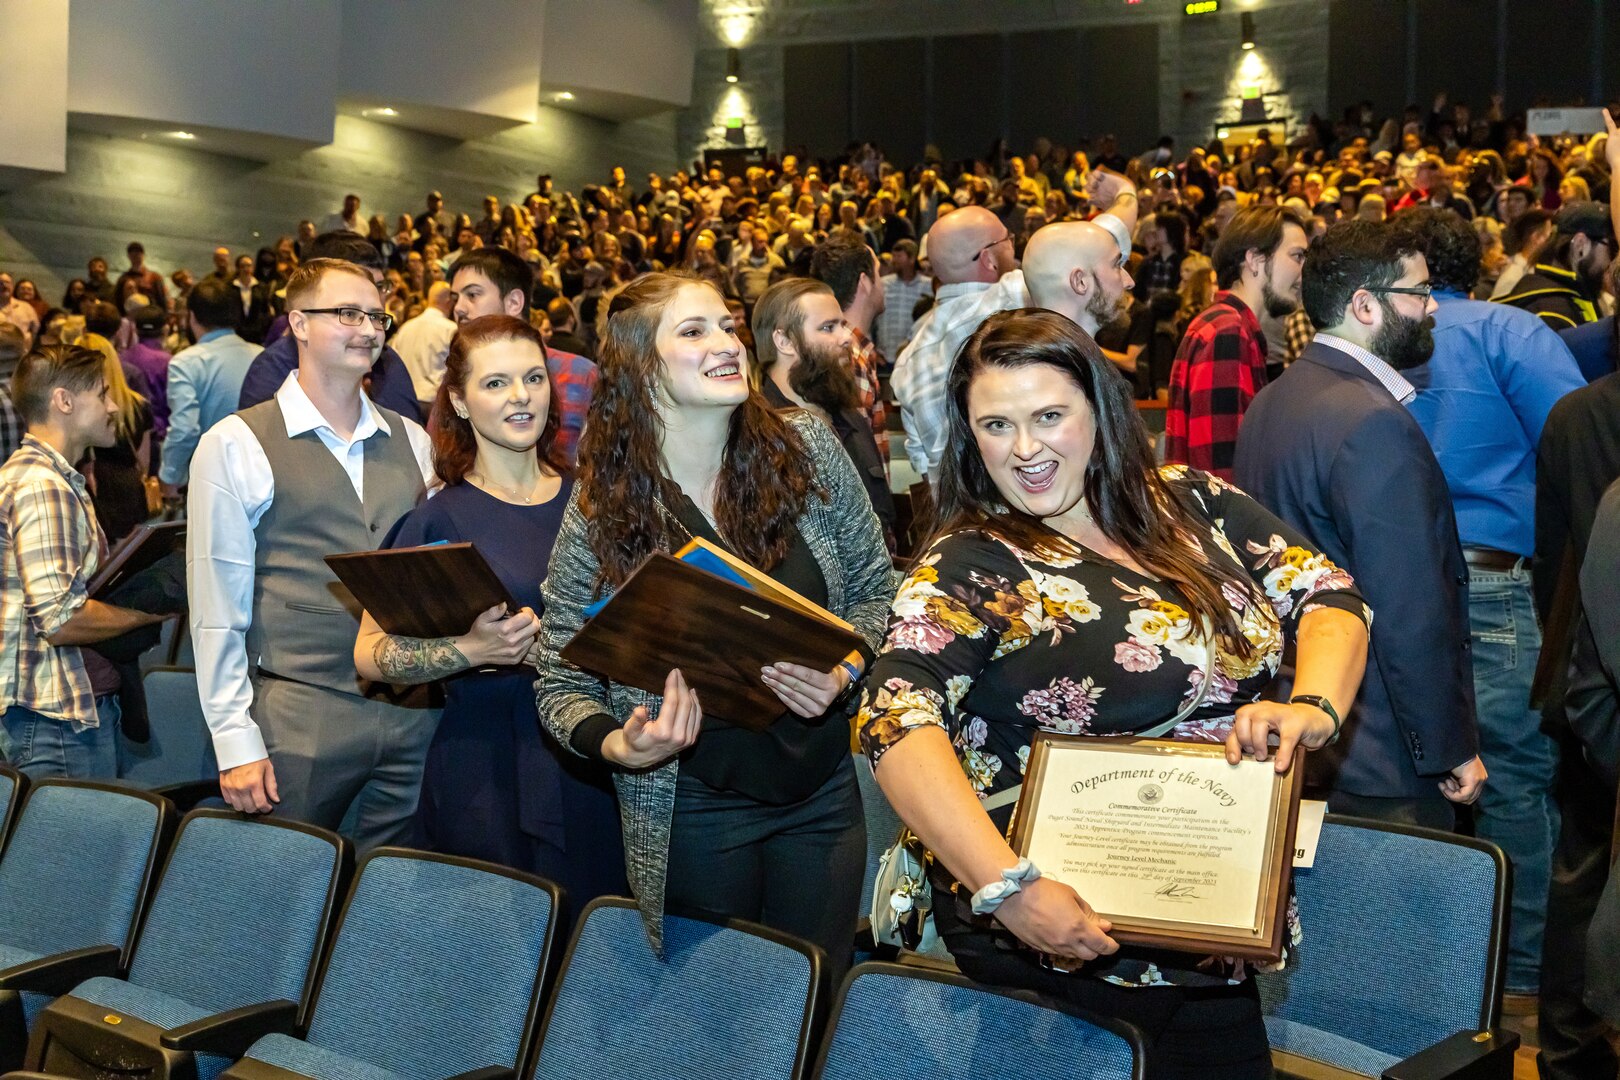 : Shop 26, Welders, apprentice class members (from left) Tyler Reynolds, Millie Stivers, Caitlin Sutter and Monika Westerfield celebrate as they exit the auditorium following the annual Puget Sound Naval Shipyard & Intermediate Maintenance Facility Apprentice Program graduation ceremony Sept. 29, 2023, at the Bremerton High School Performing Arts Center, in Bremerton, Washington.  (U.S. Navy photo by Jeb Fach)